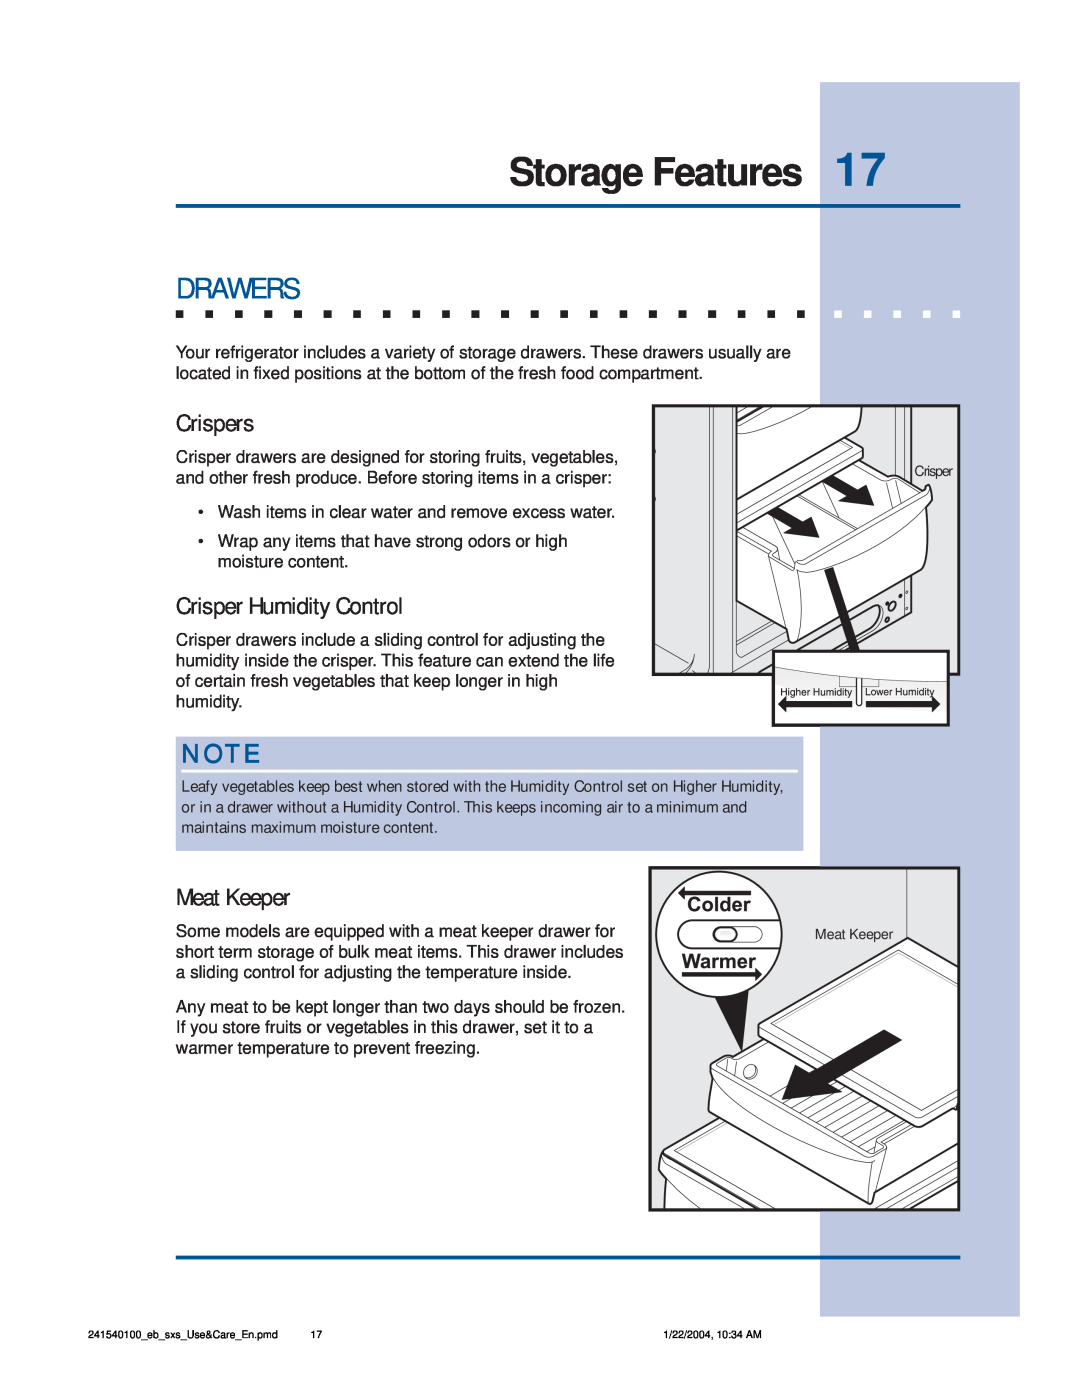 Frigidaire 241540100 (1203) manual Storage Features, Drawers, Crispers, Crisper Humidity Control, Meat Keeper 